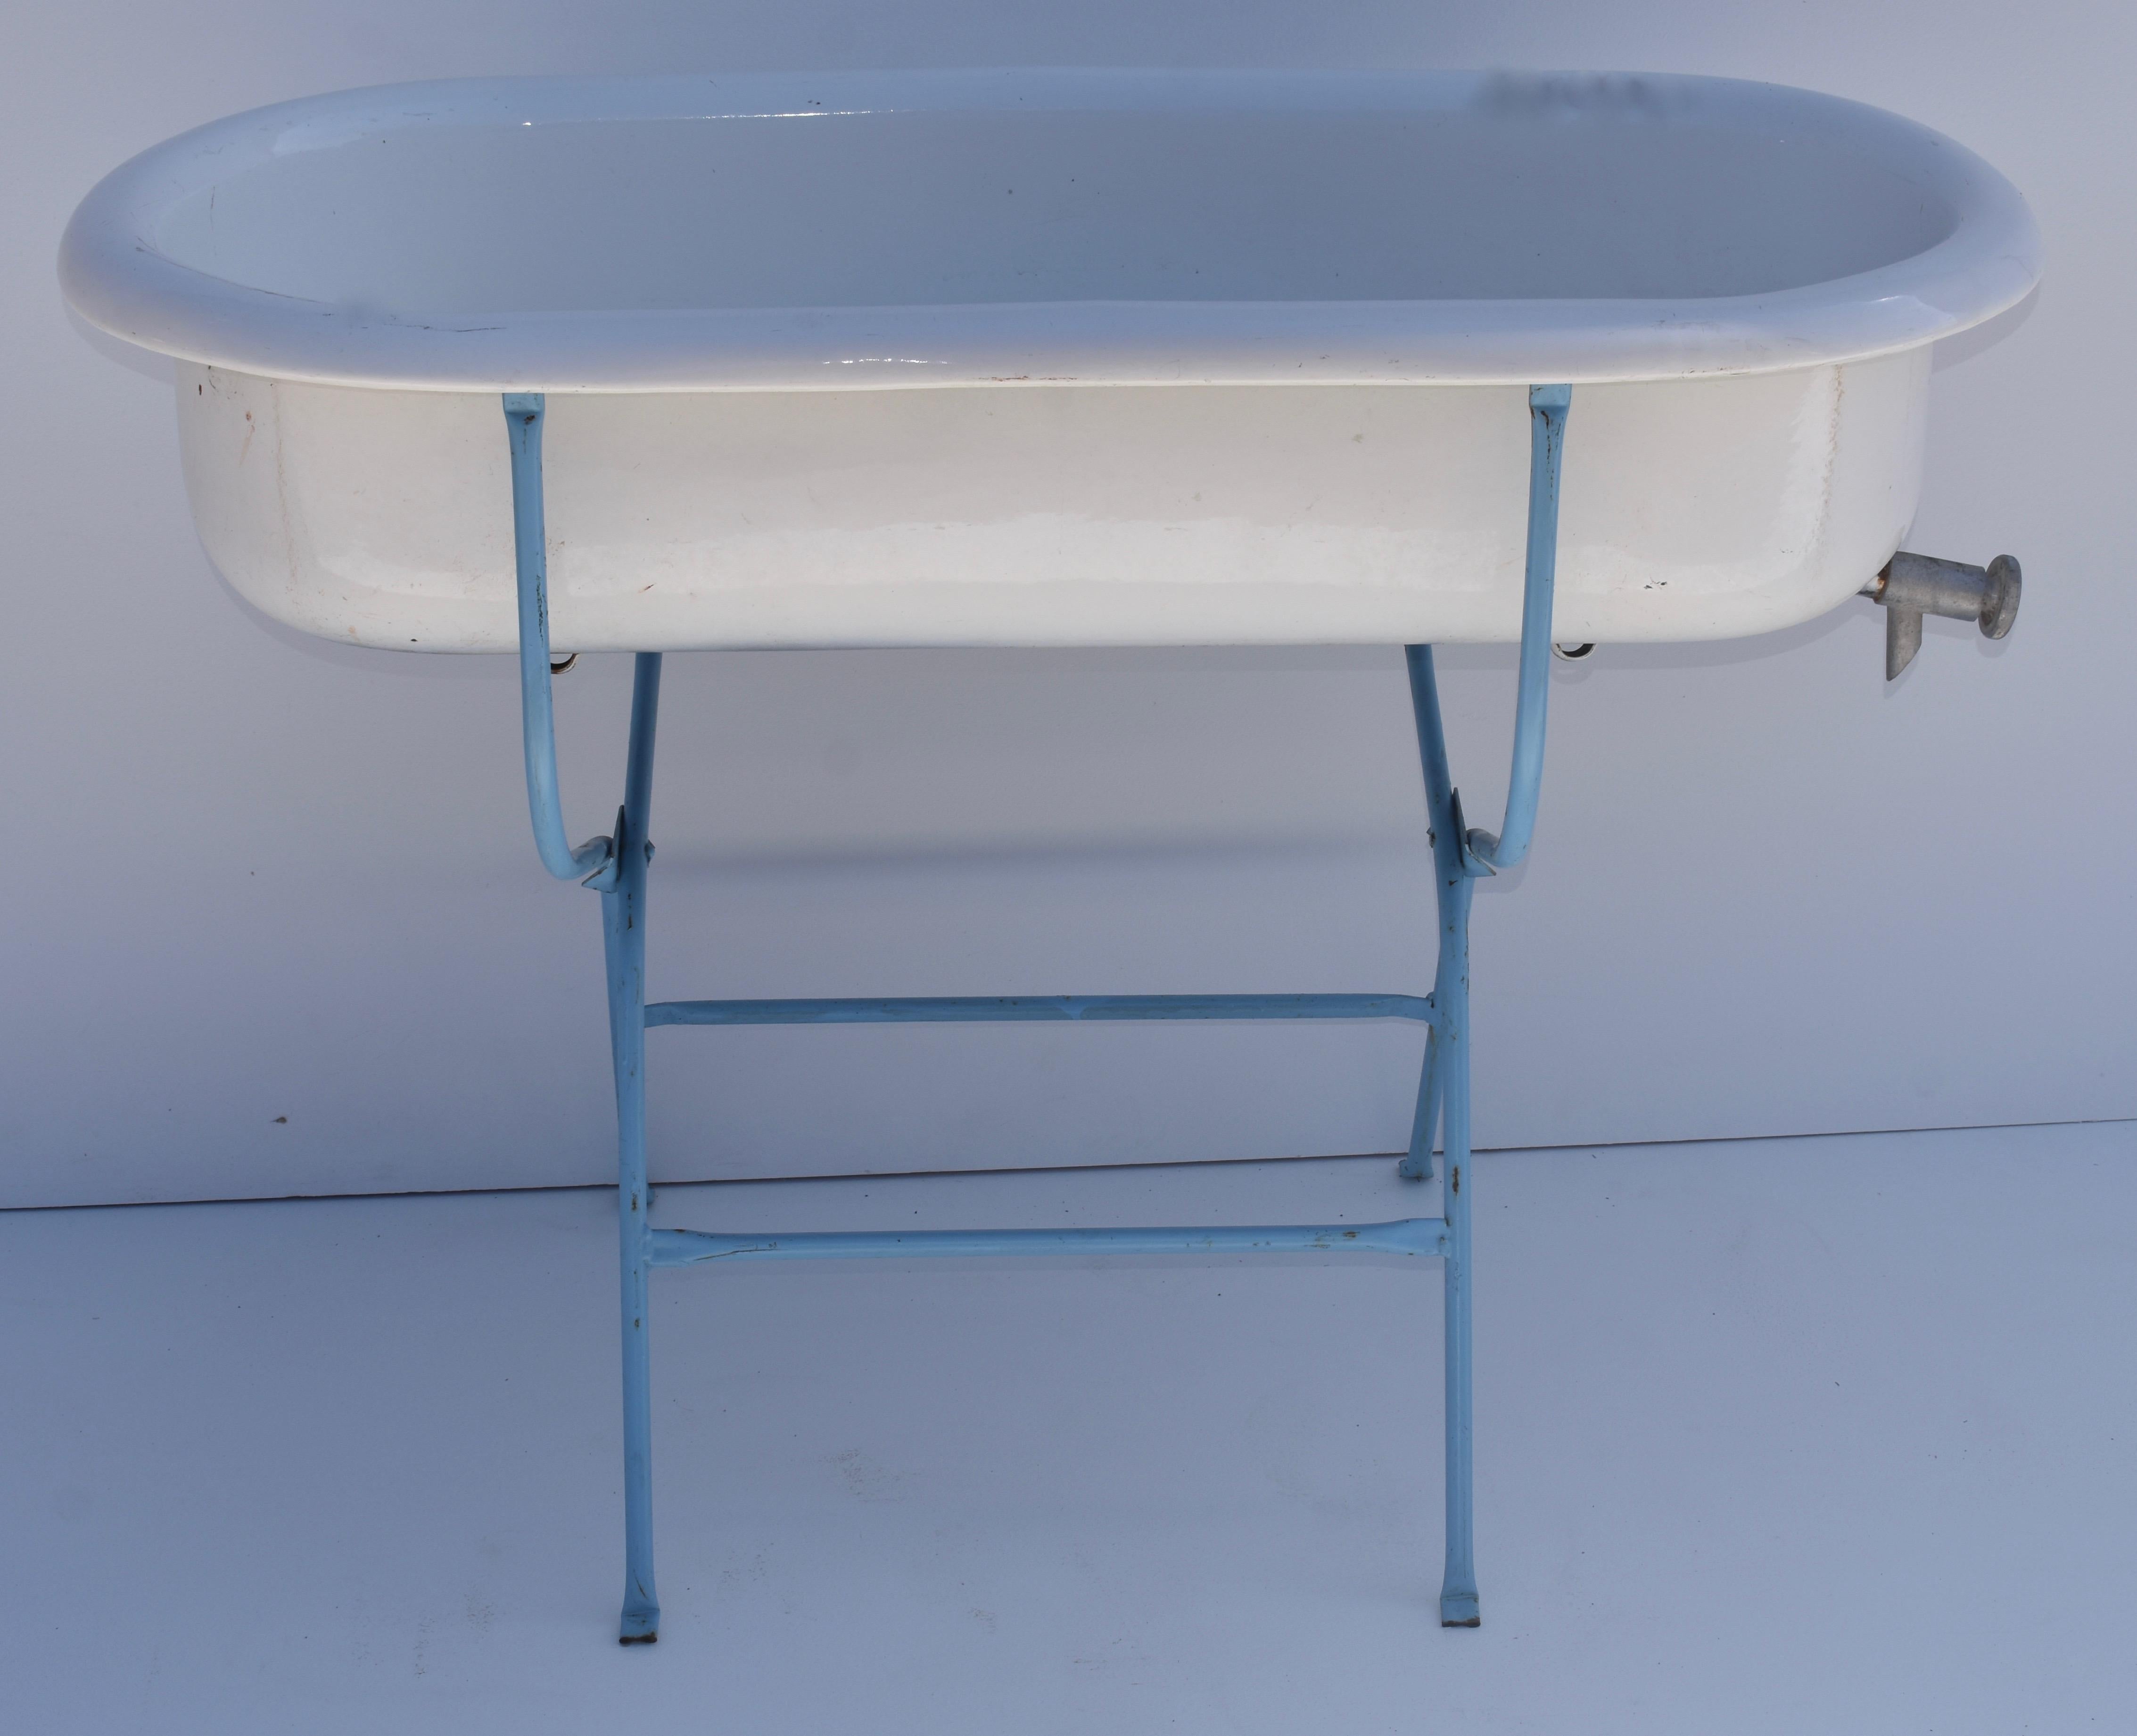 This is a delightful porcelain enameled baby bath by Lampart of Hungary, mounted on an original repainted folding wrought iron stand. With summer approaching it would be great filled with bottles of beer or wine on ice, or perfect as a planter or